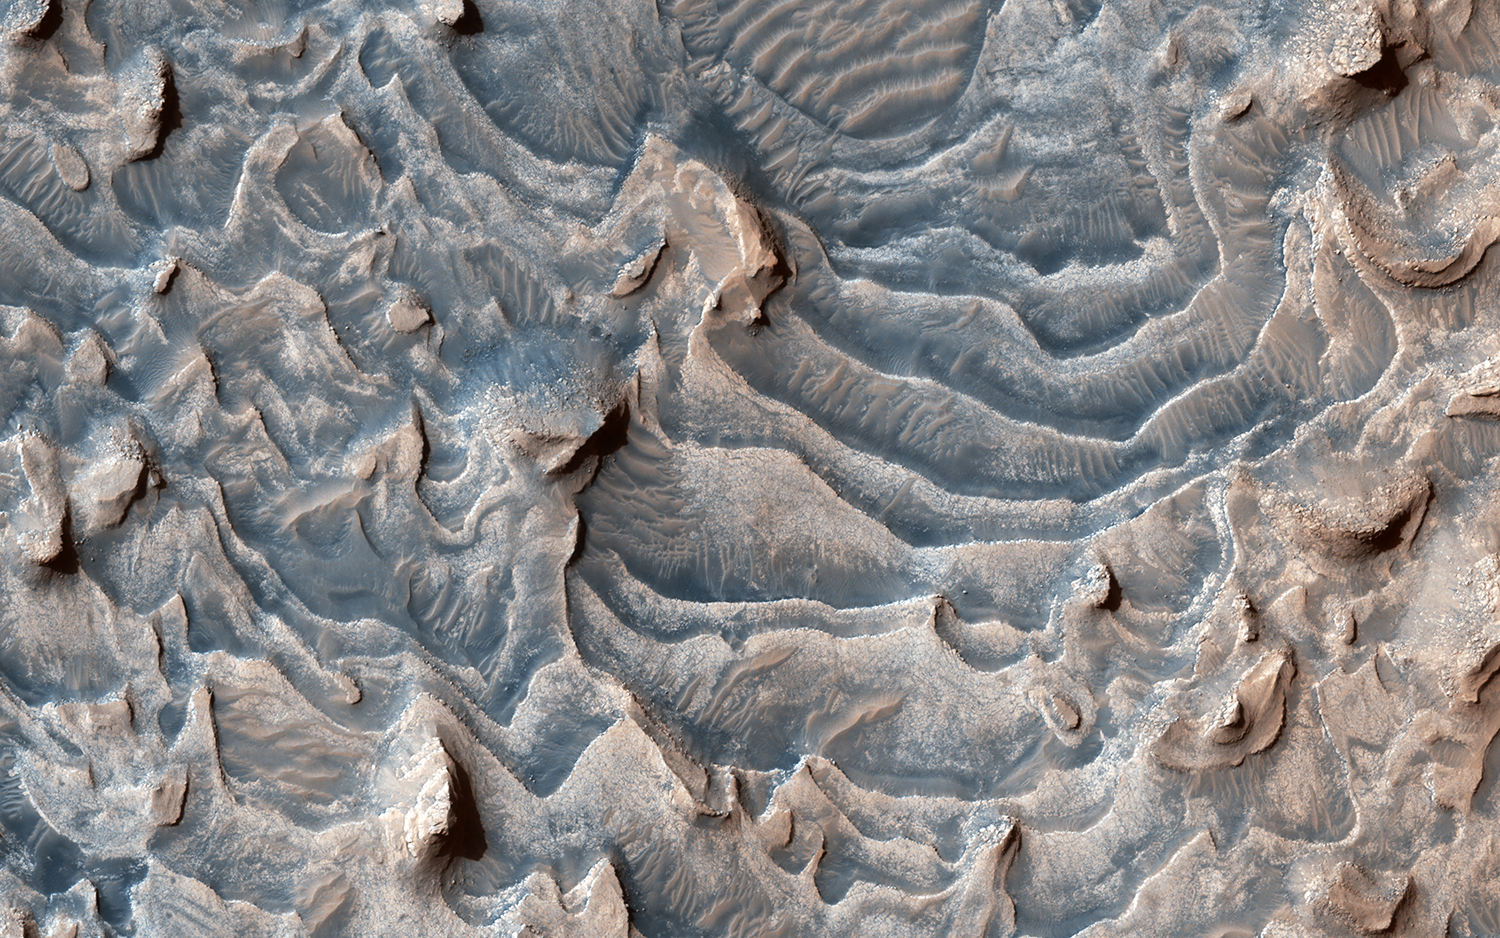 layered-rock-formation-within-jiji-crater-that-has-eroded-into-buttes-and-stair-like-layers.jpg